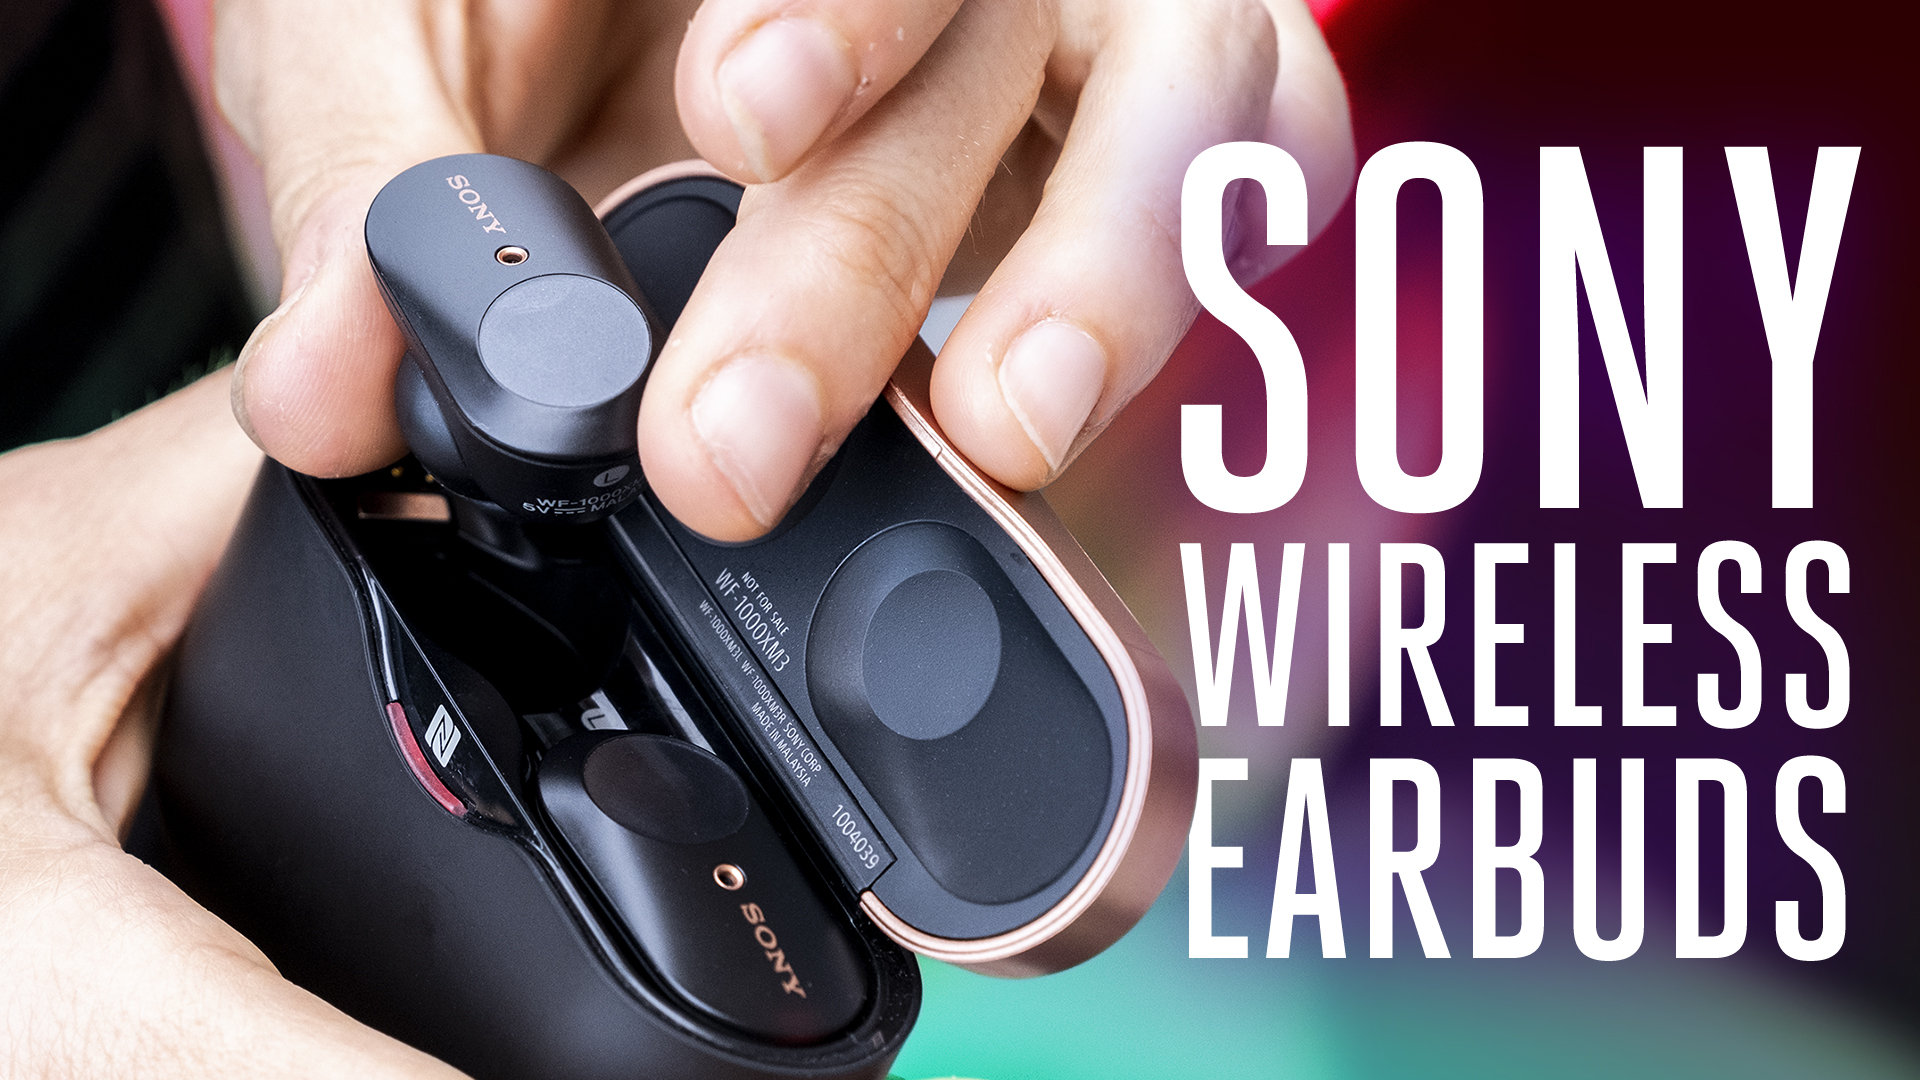 Sony WF-1000XM3 noise-canceling earbuds review - The Verge